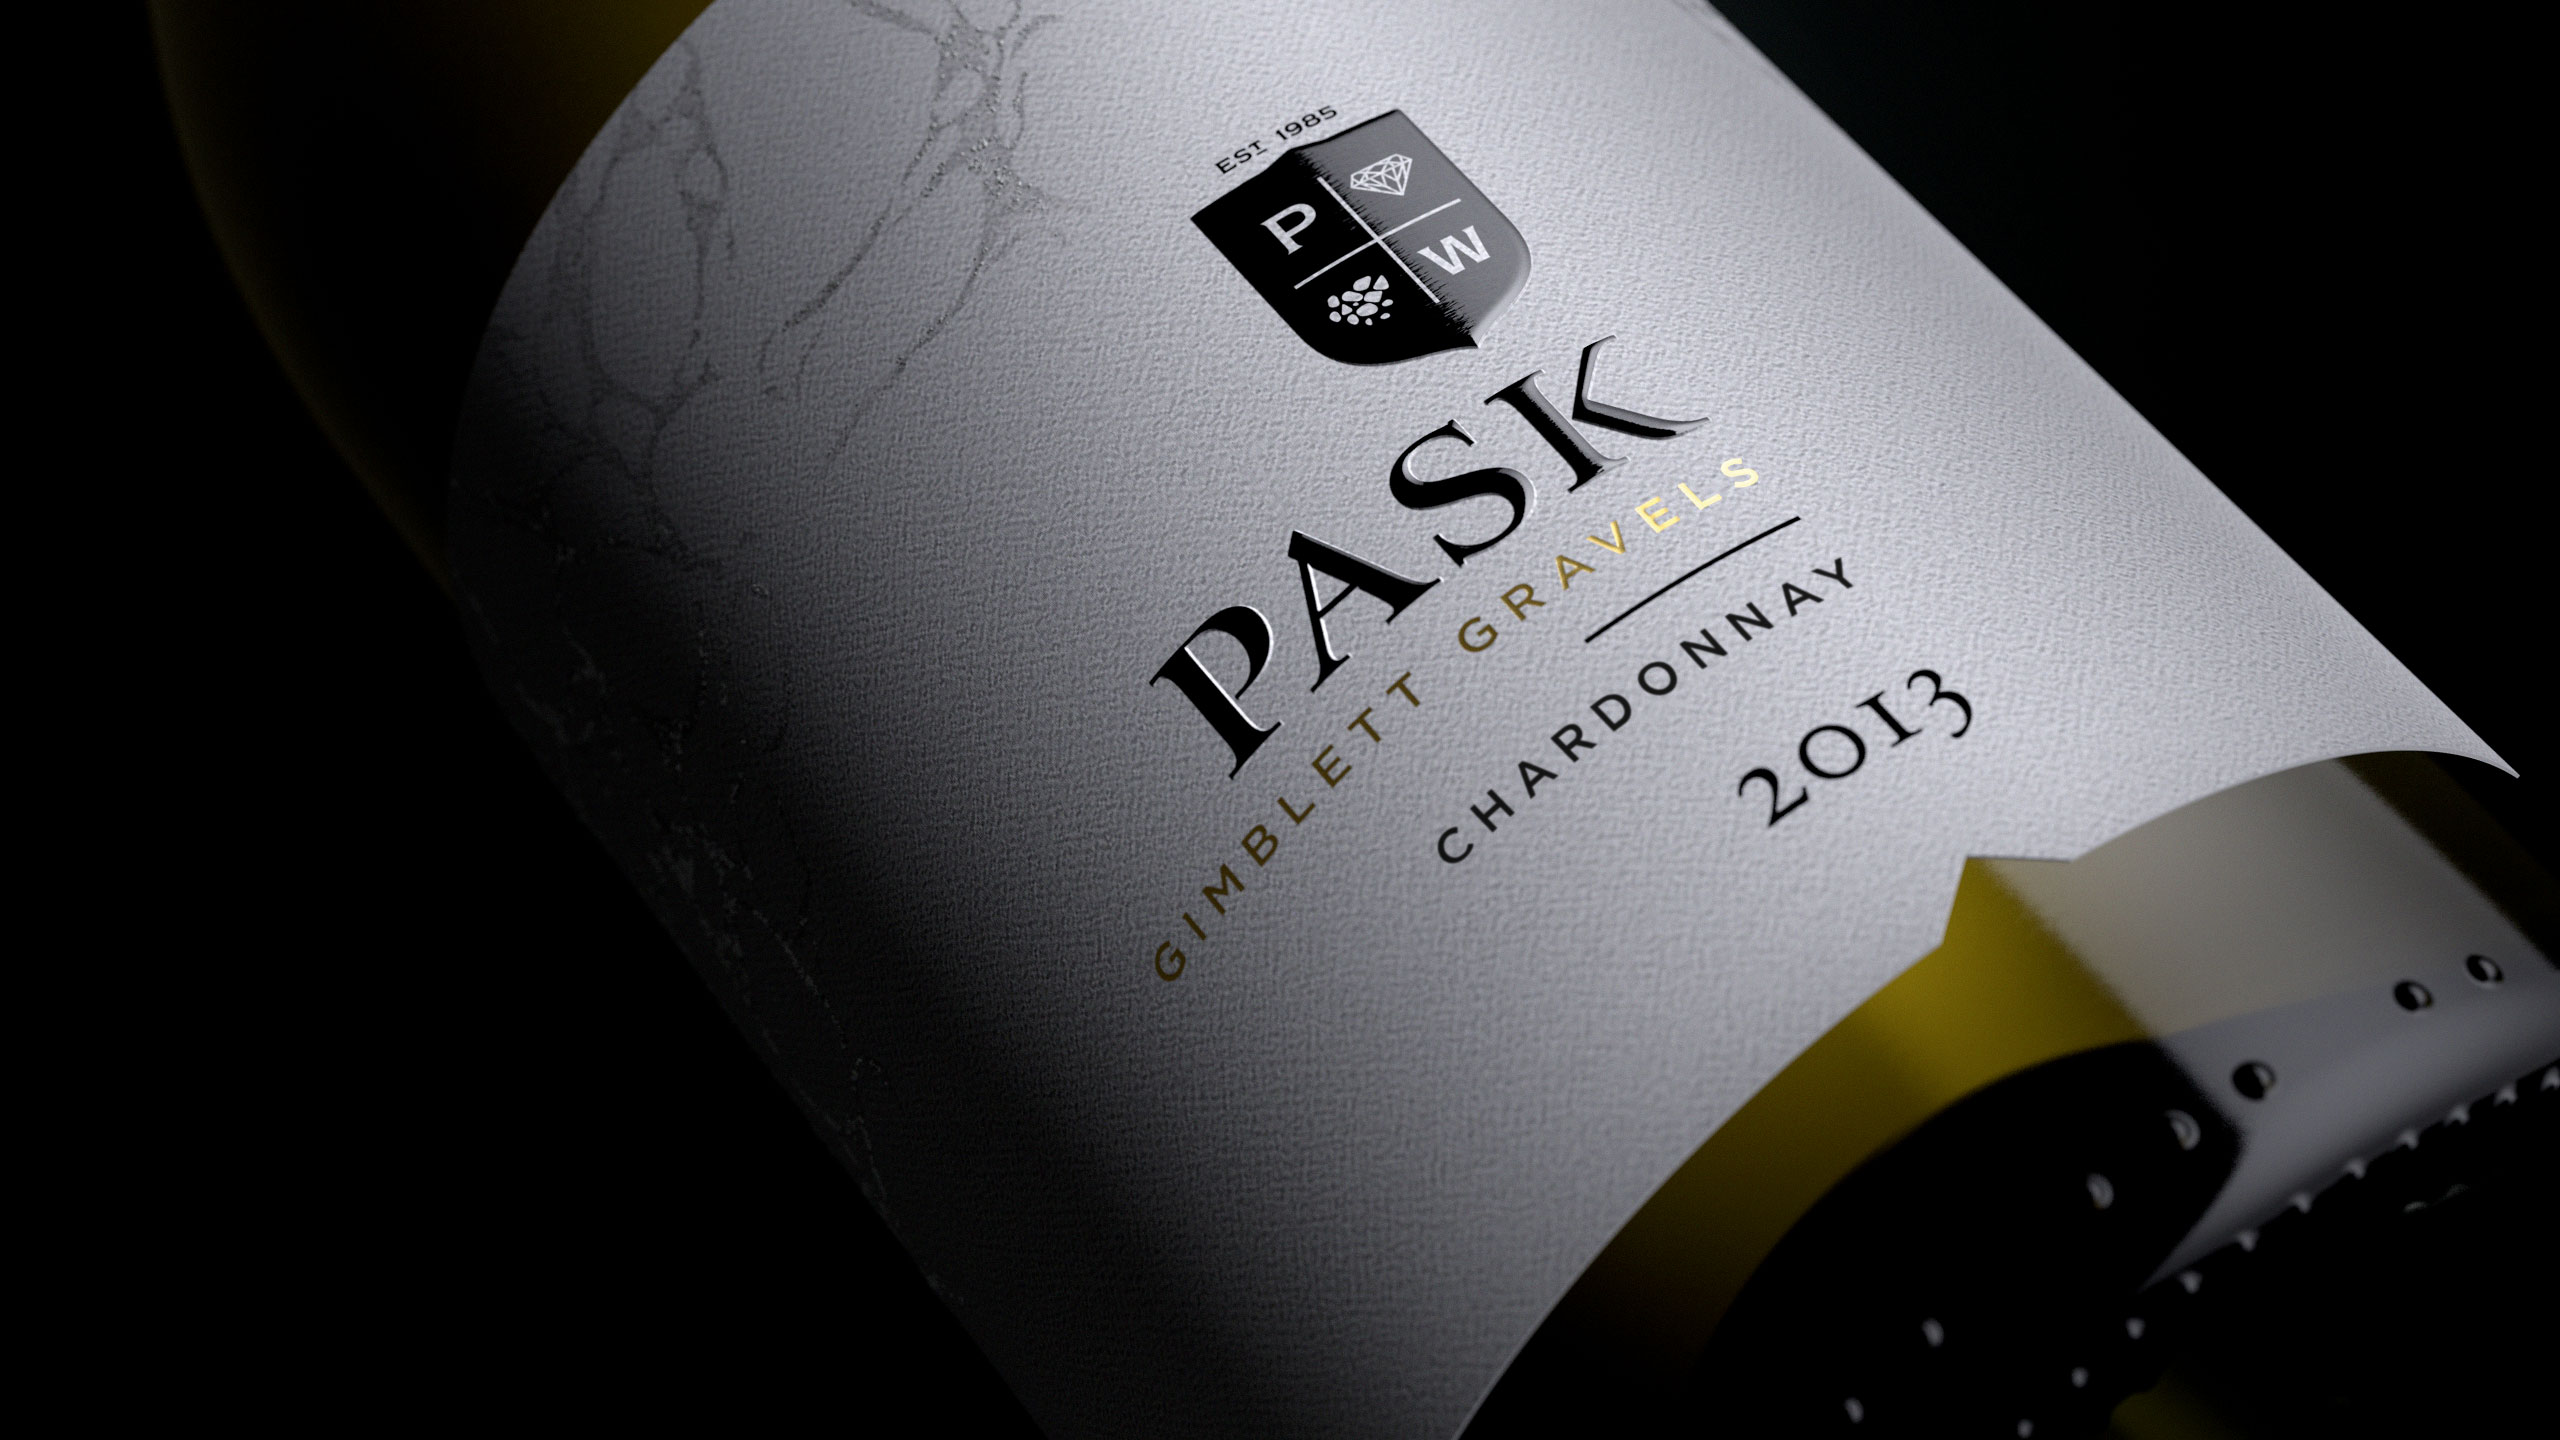 Tried-and-True-Design-Auckland-Pask-Winery-rebrand-wine-gimblett-gravels-close-up